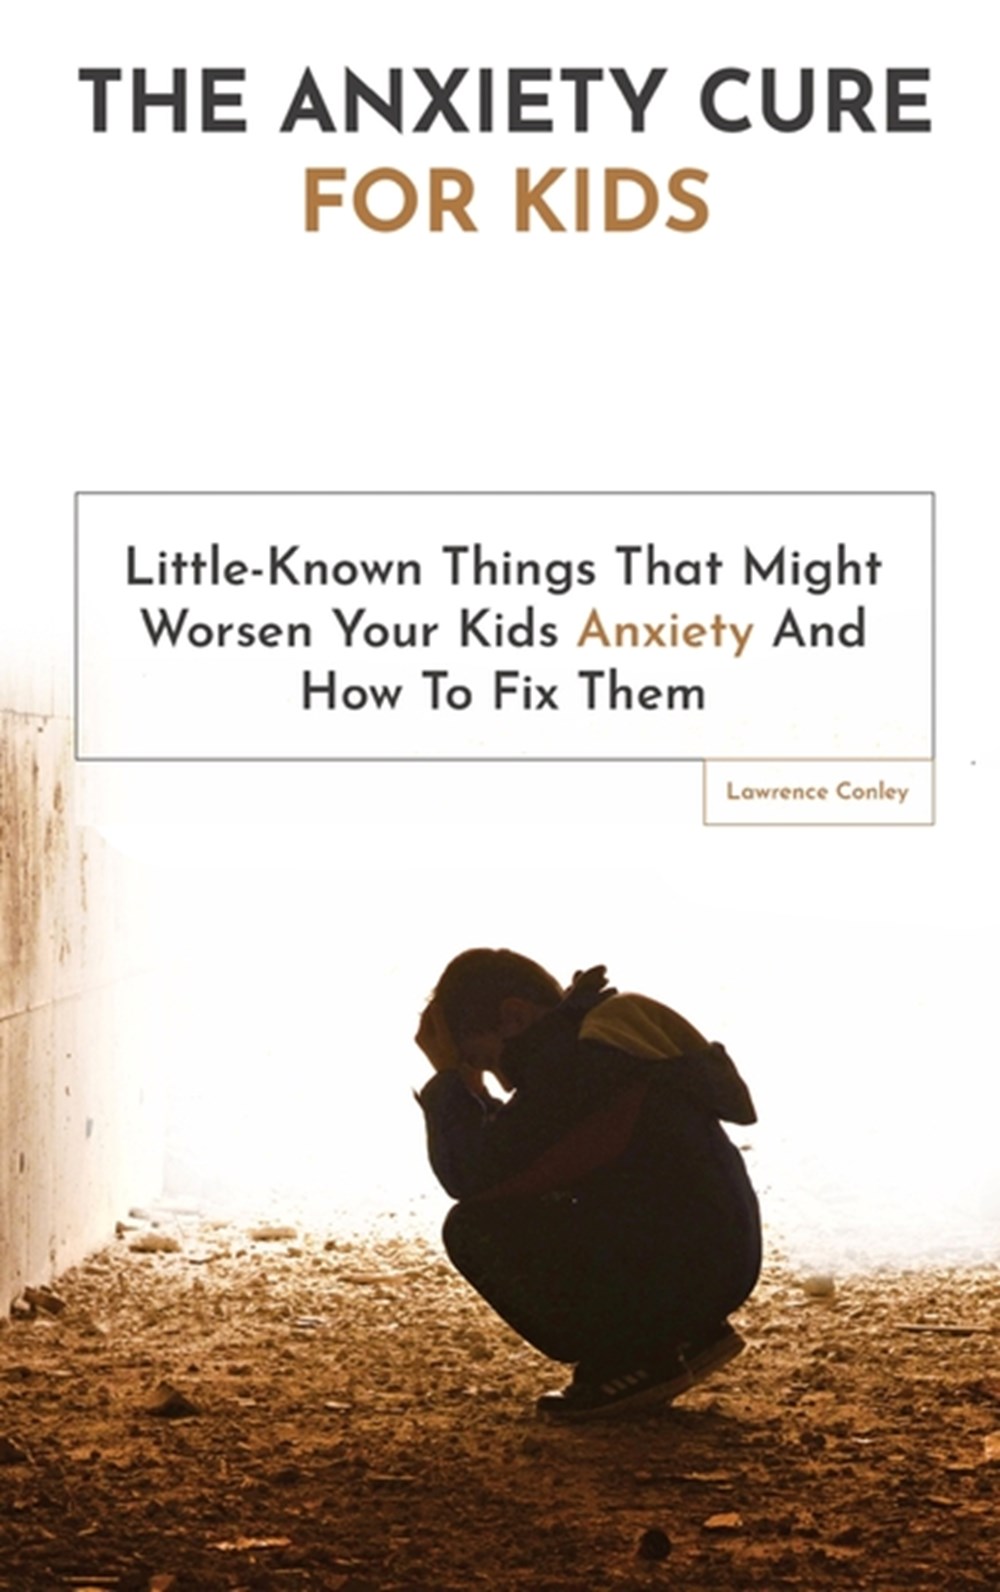 Anxiety Cure For Kids: Little-Known Things That Might Worsen Your Kids Anxiety And How To Fix Them